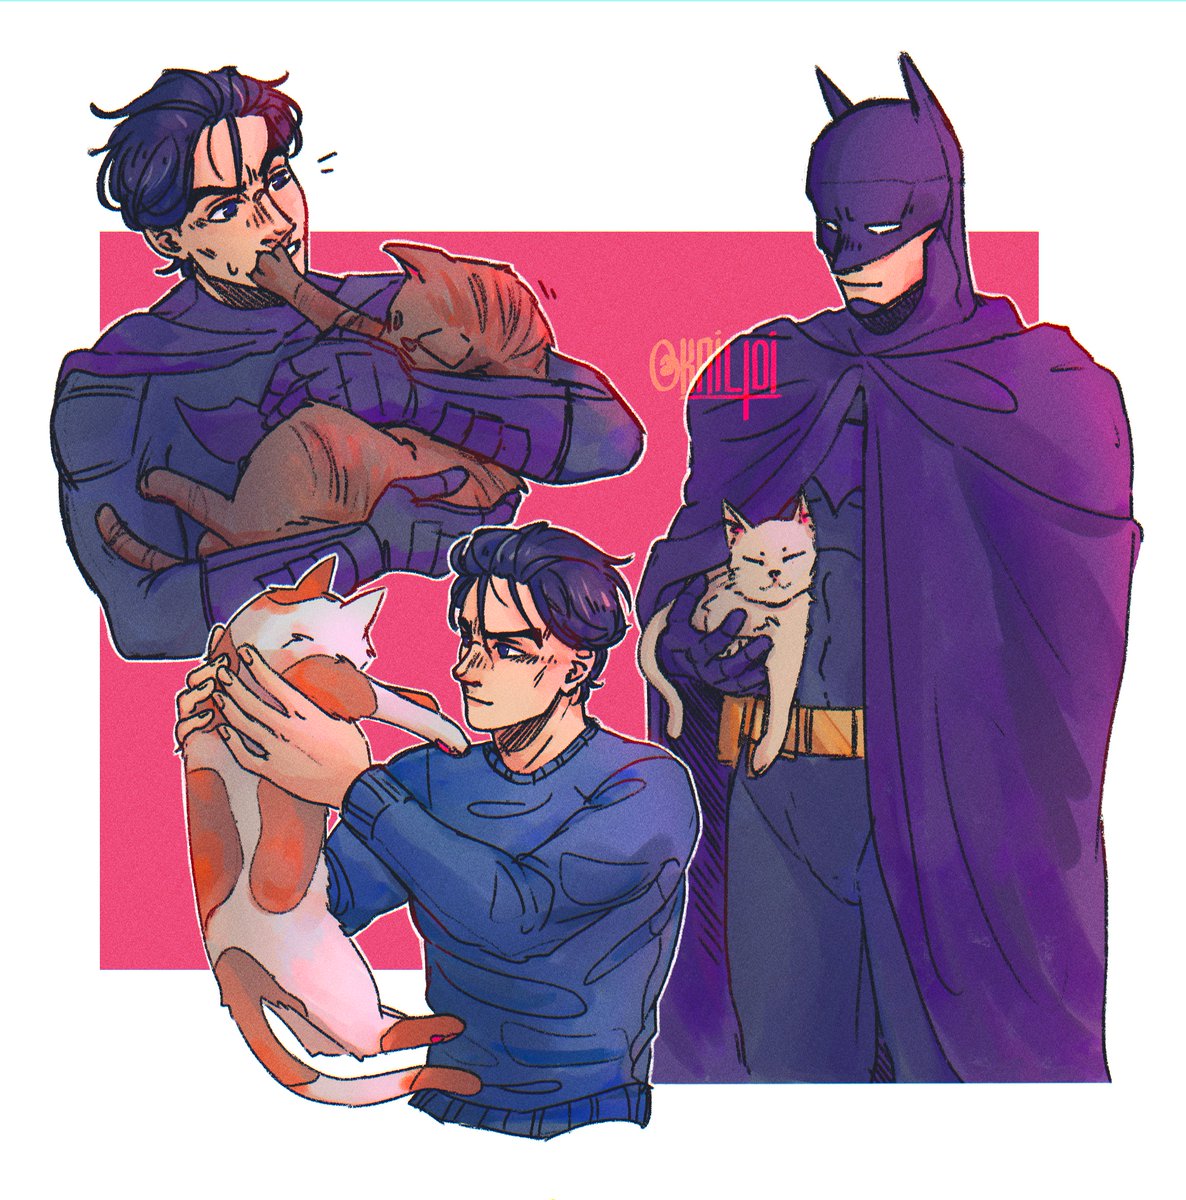 inspired by the most insignificant 2 clips from JLA and BTAS where he's got a cat in his arms, and it makes me so so soft and weak😔 I needed more Bruce With Cat™ immediately so this spawned